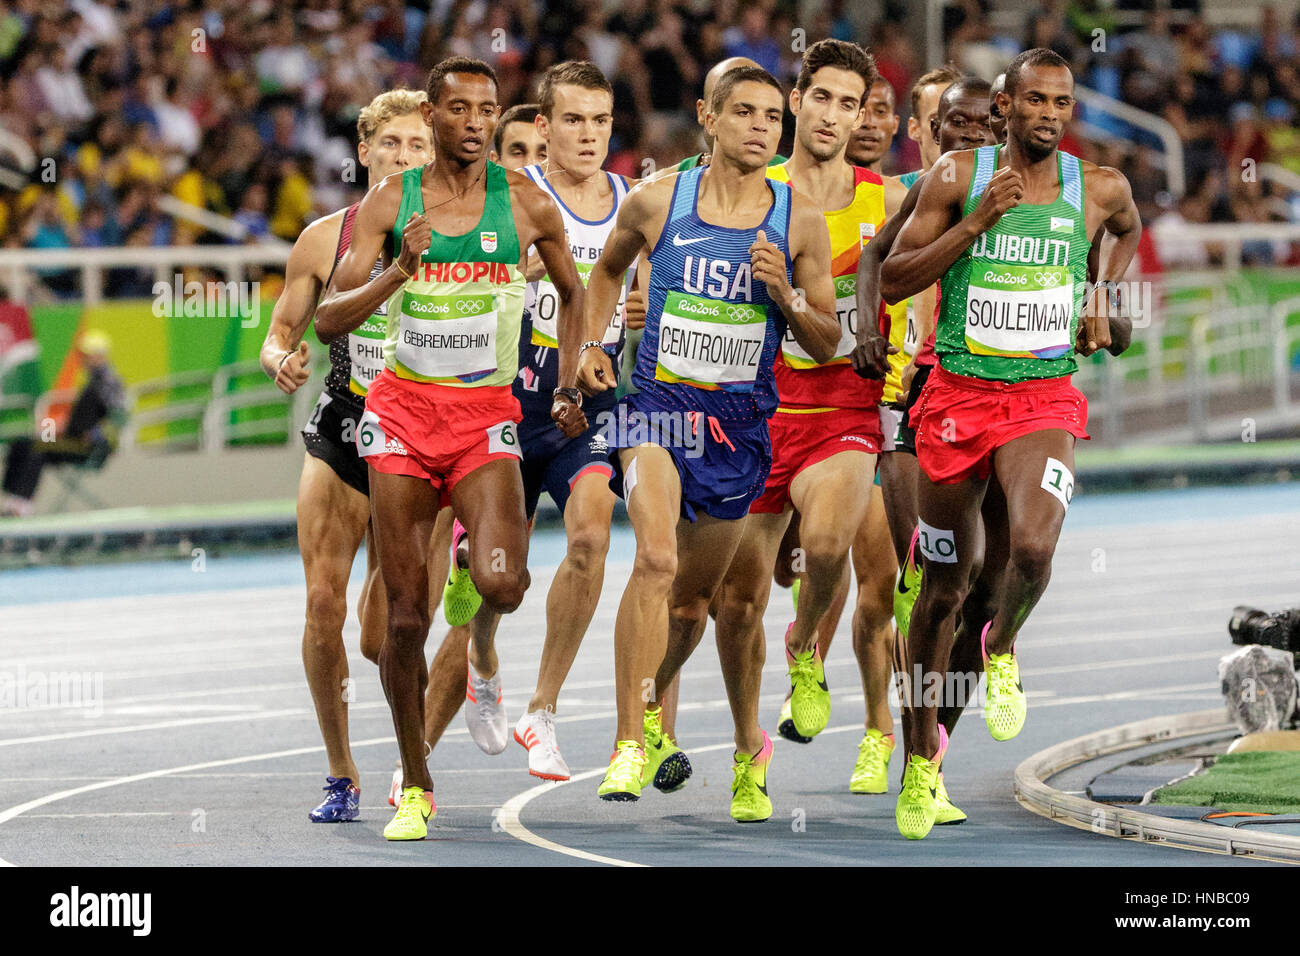 Rio de Janeiro, Brazil. 18 August 2016.  Athletics, Matthew Centrowitz (USA)  competing in the men's 1500m semi-final at the 2016 Olympic Summer Games Stock Photo